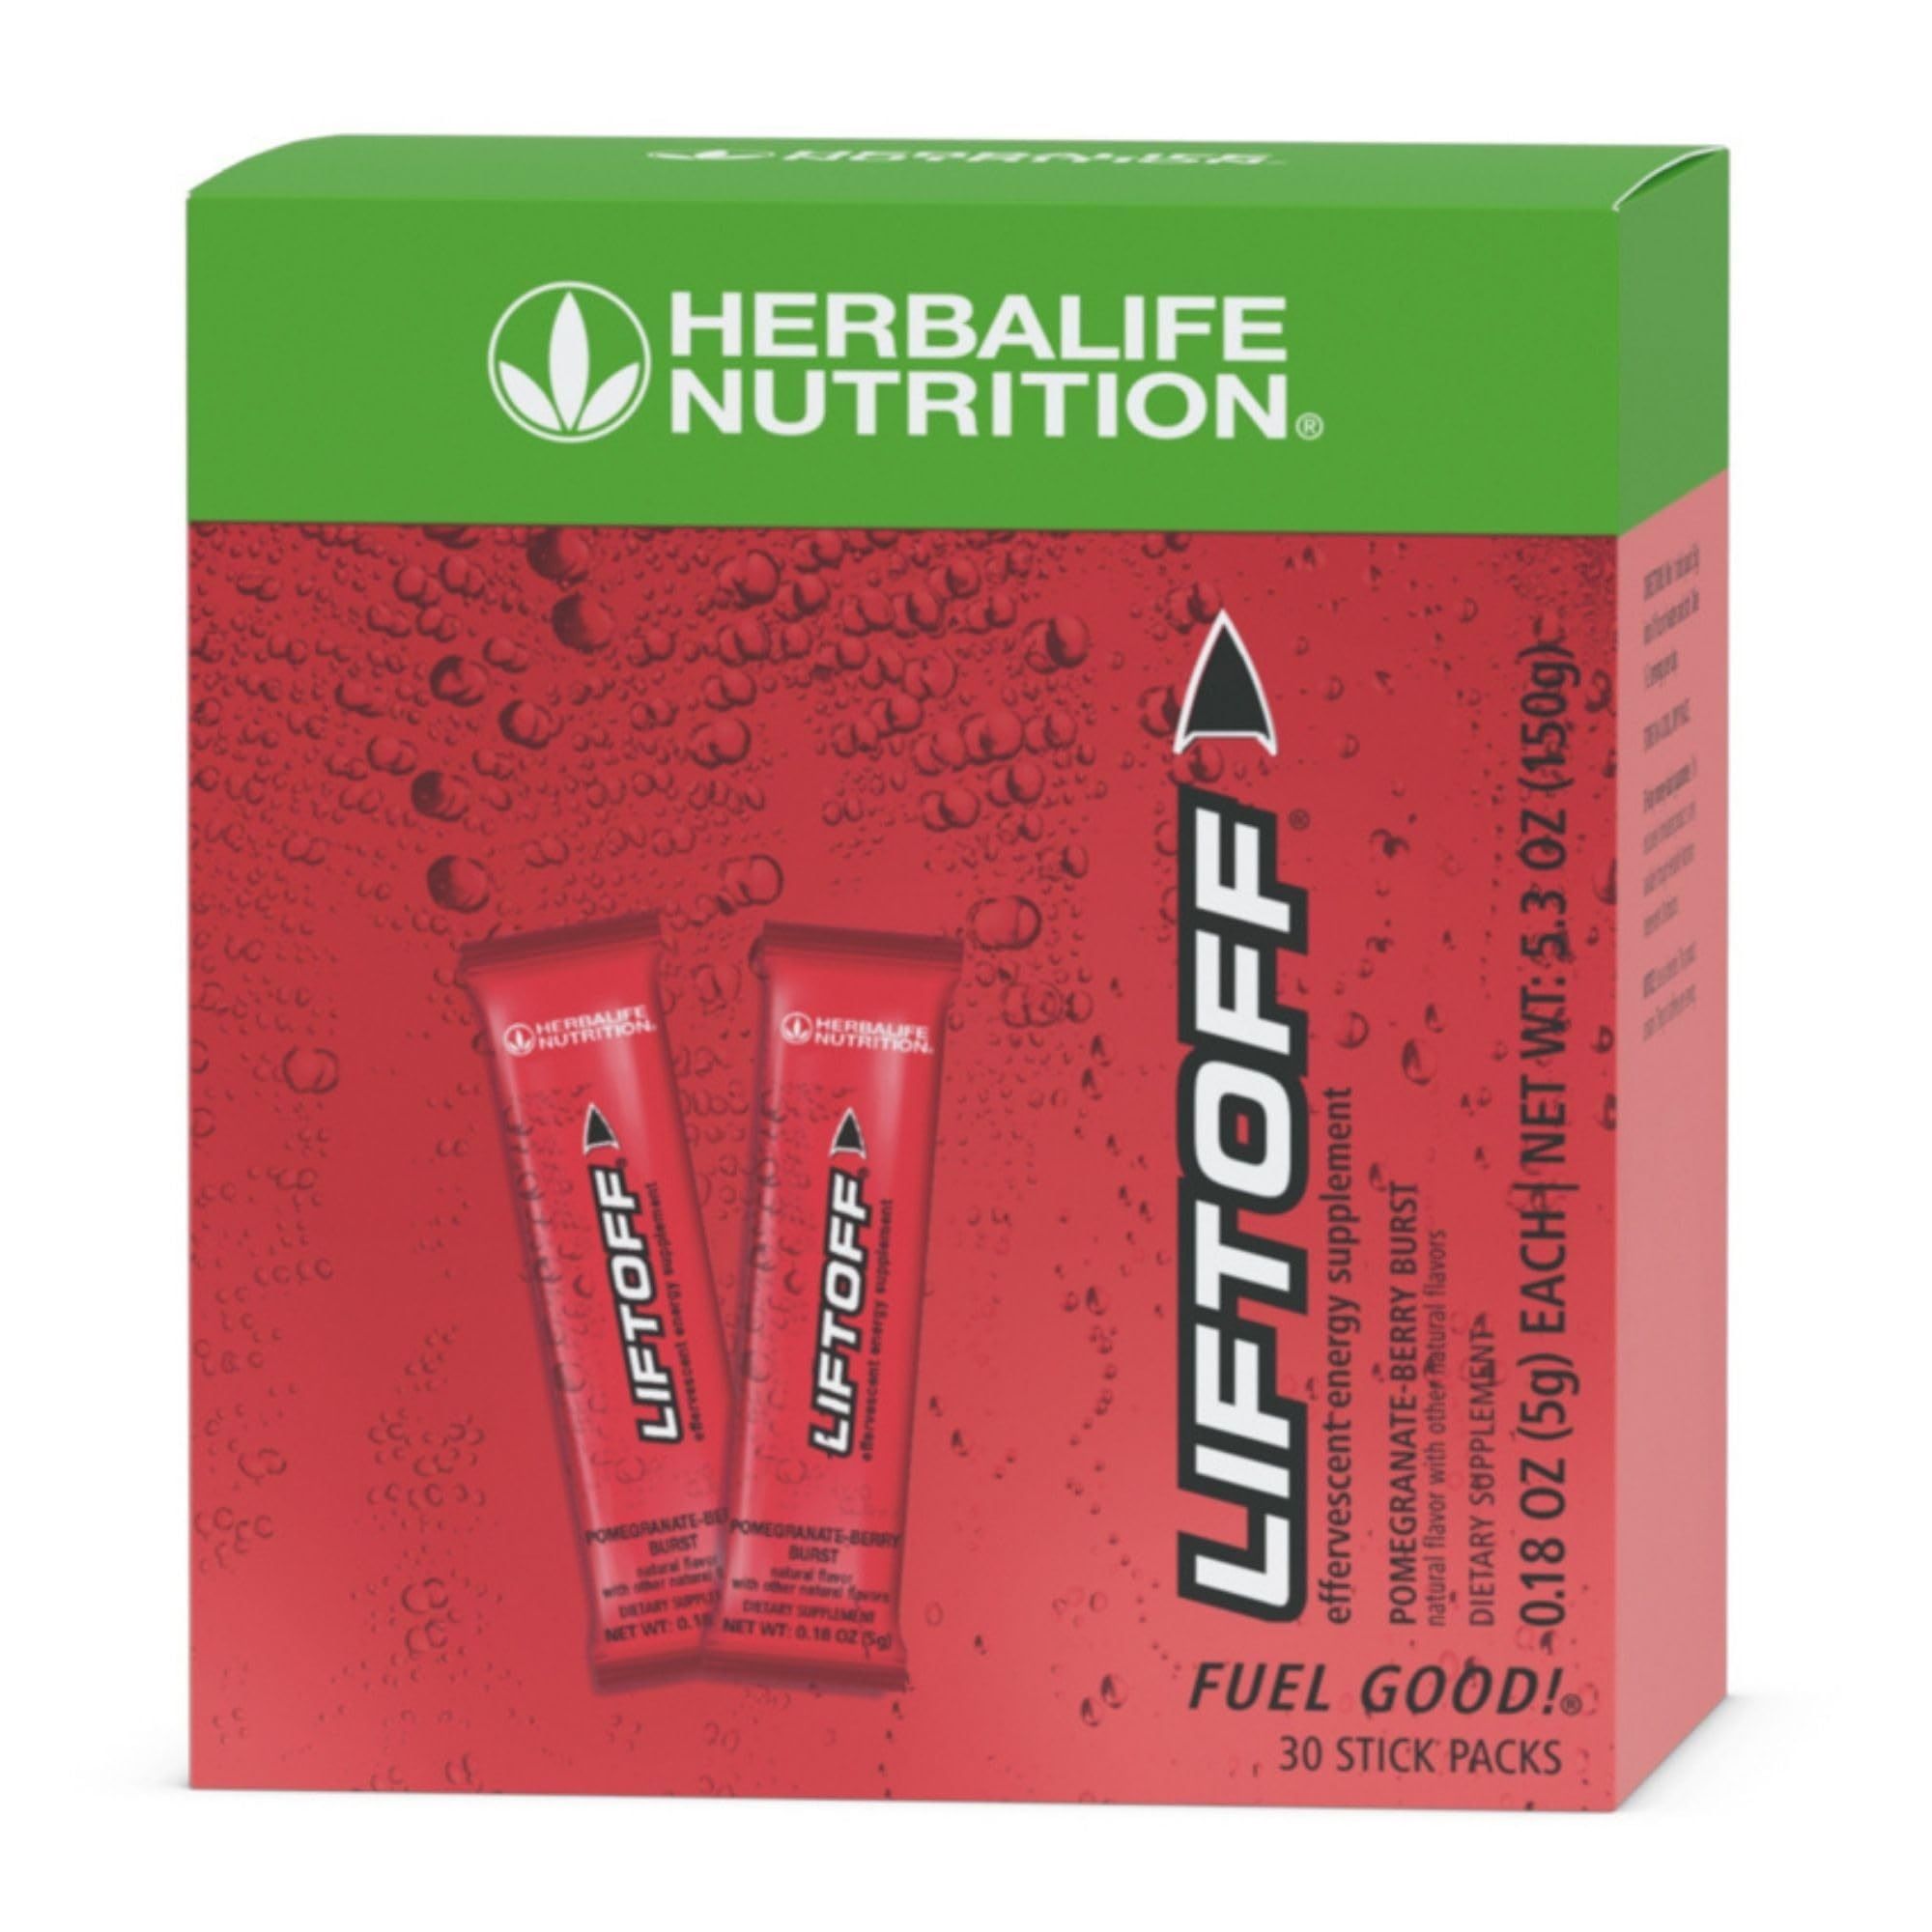 11-liftoff-herbalife-nutrition-facts